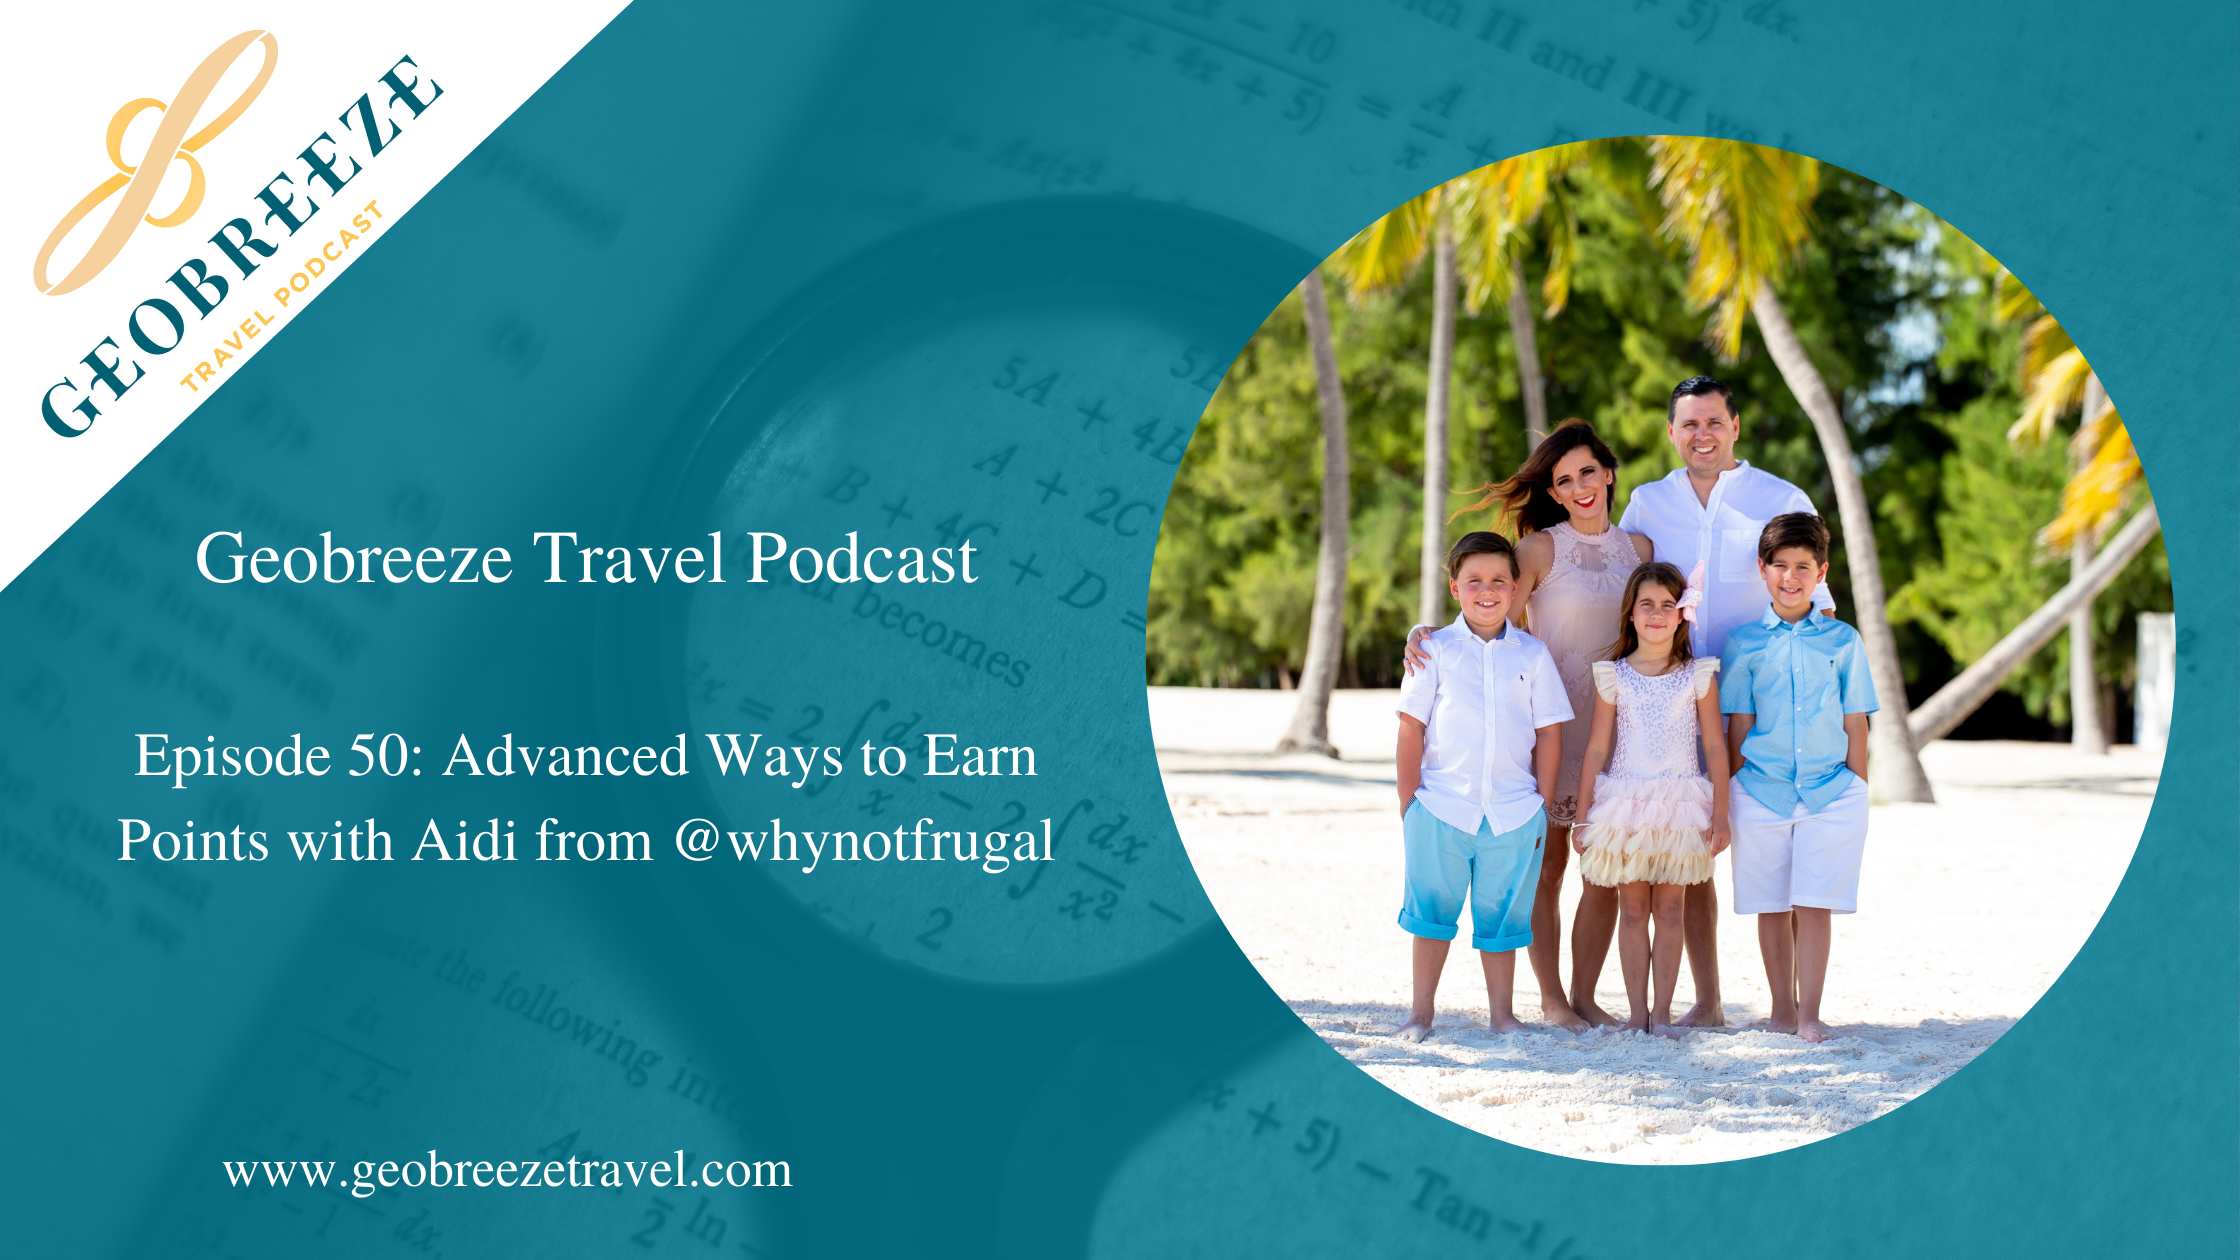 Episode 50: Advanced Ways to Earn Points with Aidi from @whynotfrugal